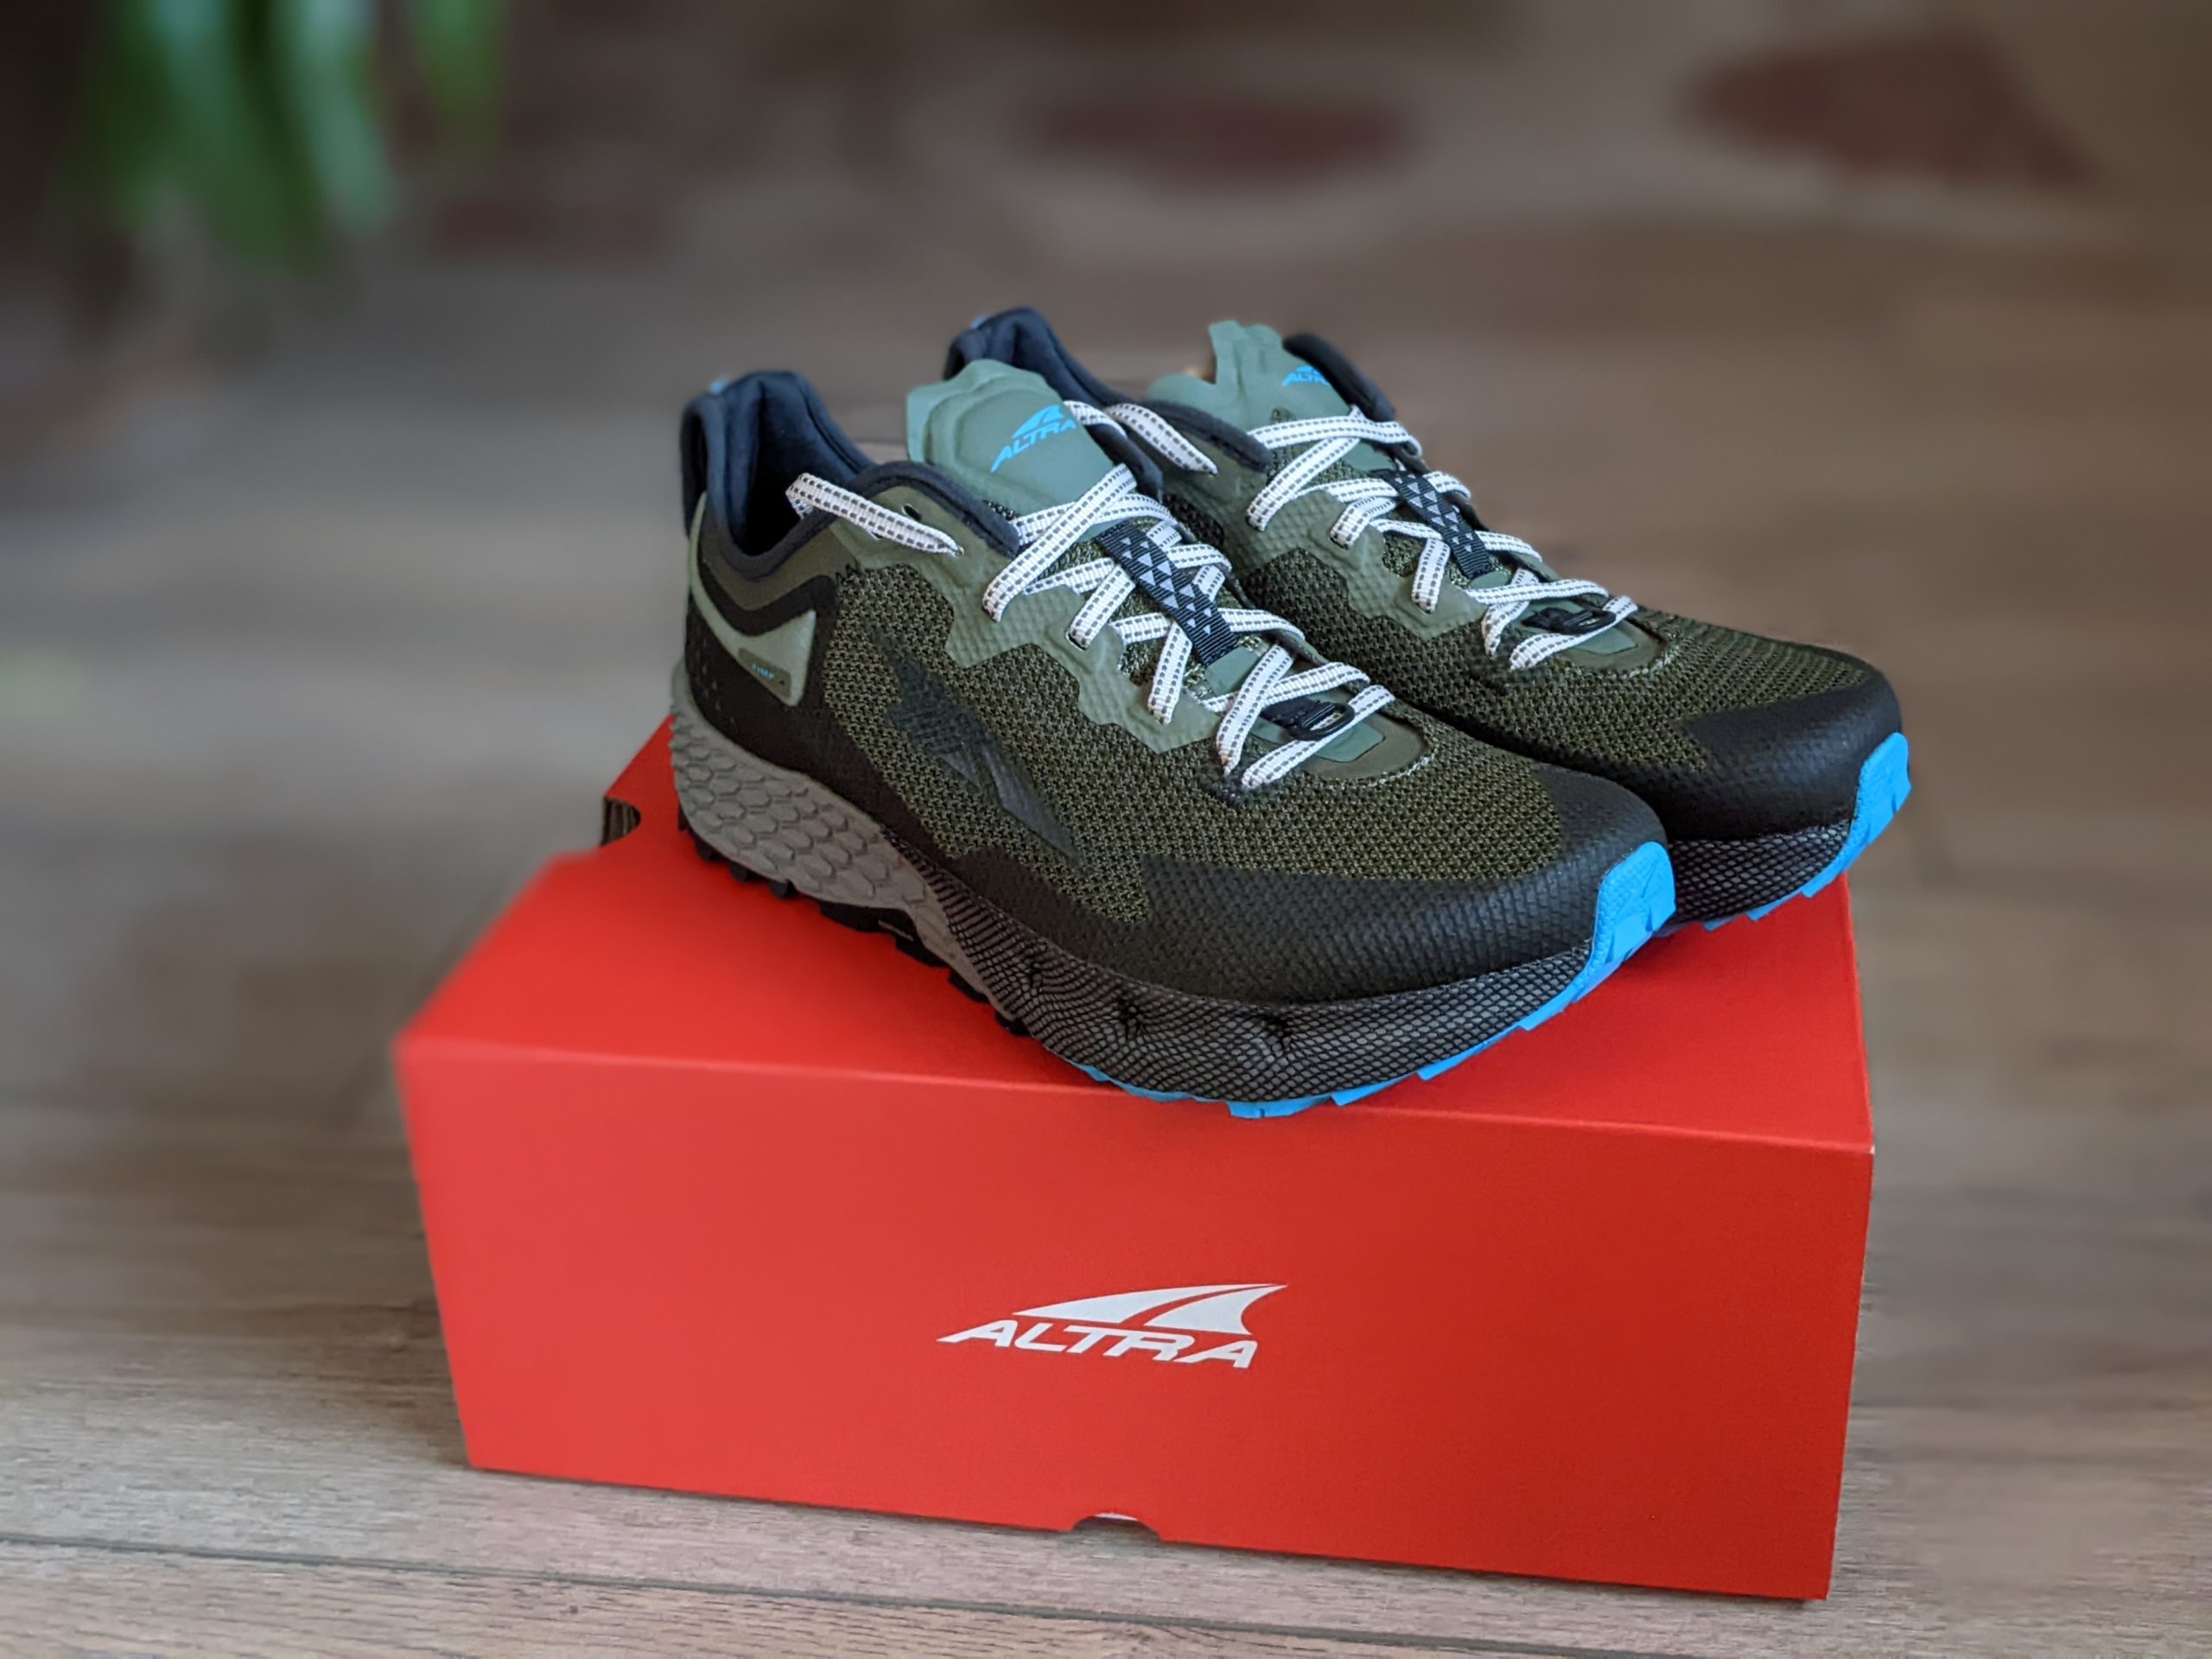 Altra Timp 4 Review - The entry shoe for non Altra runners